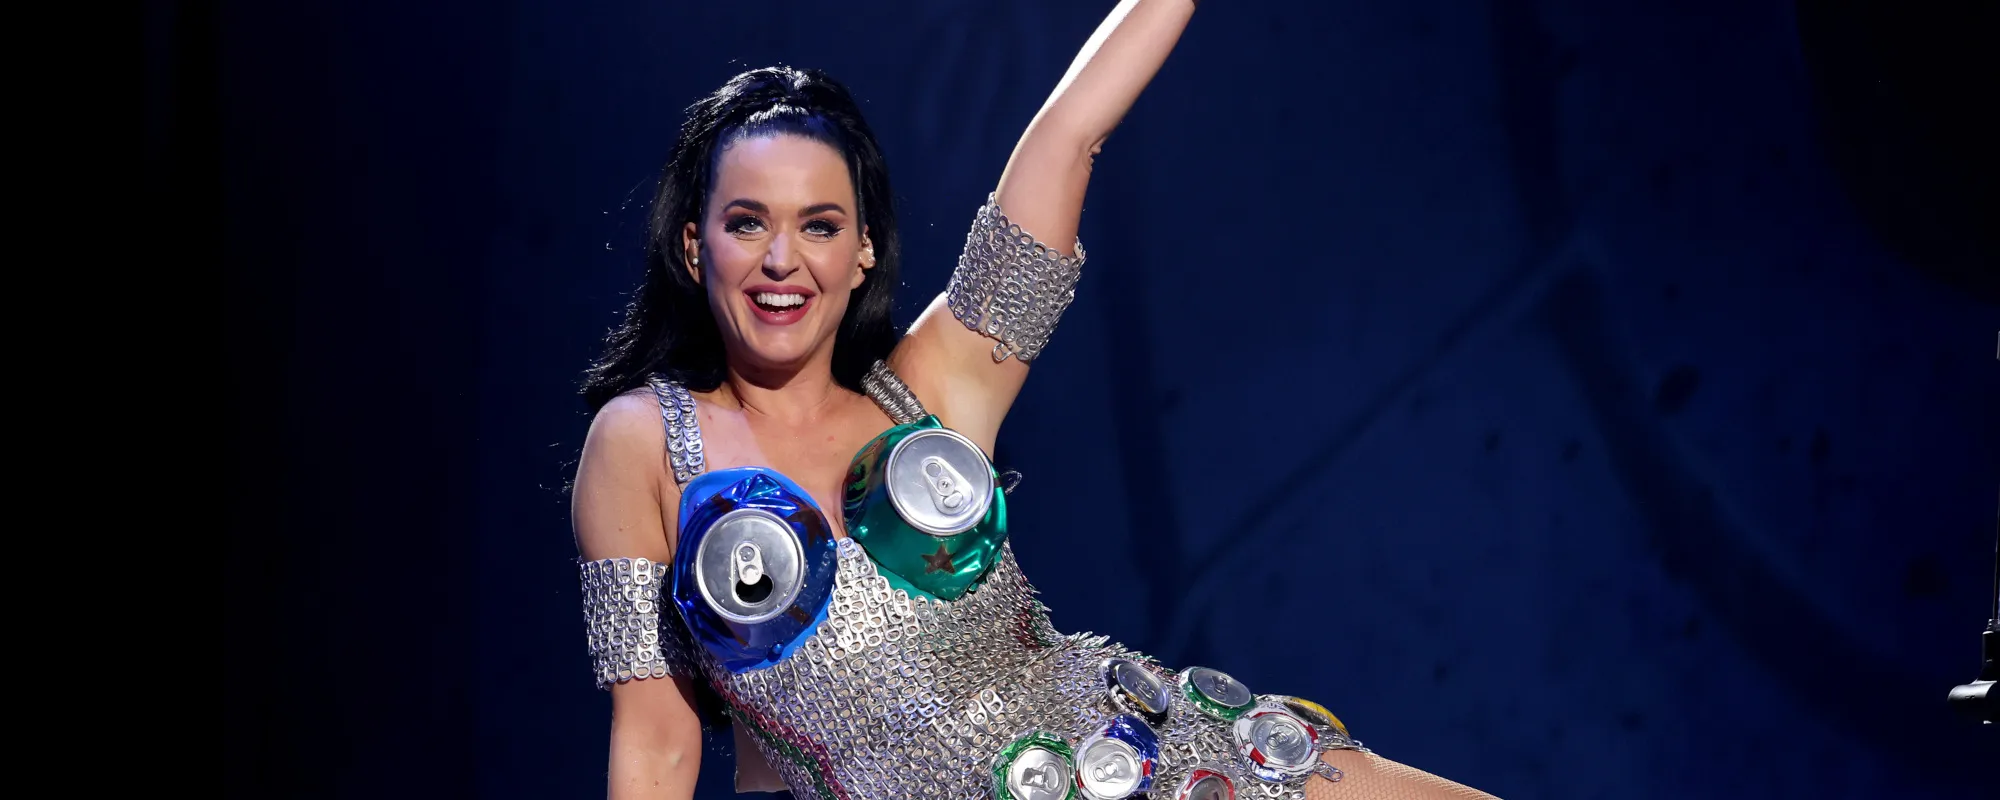 6 Songs You Didn’t Know Katy Perry Wrote for Other Artists